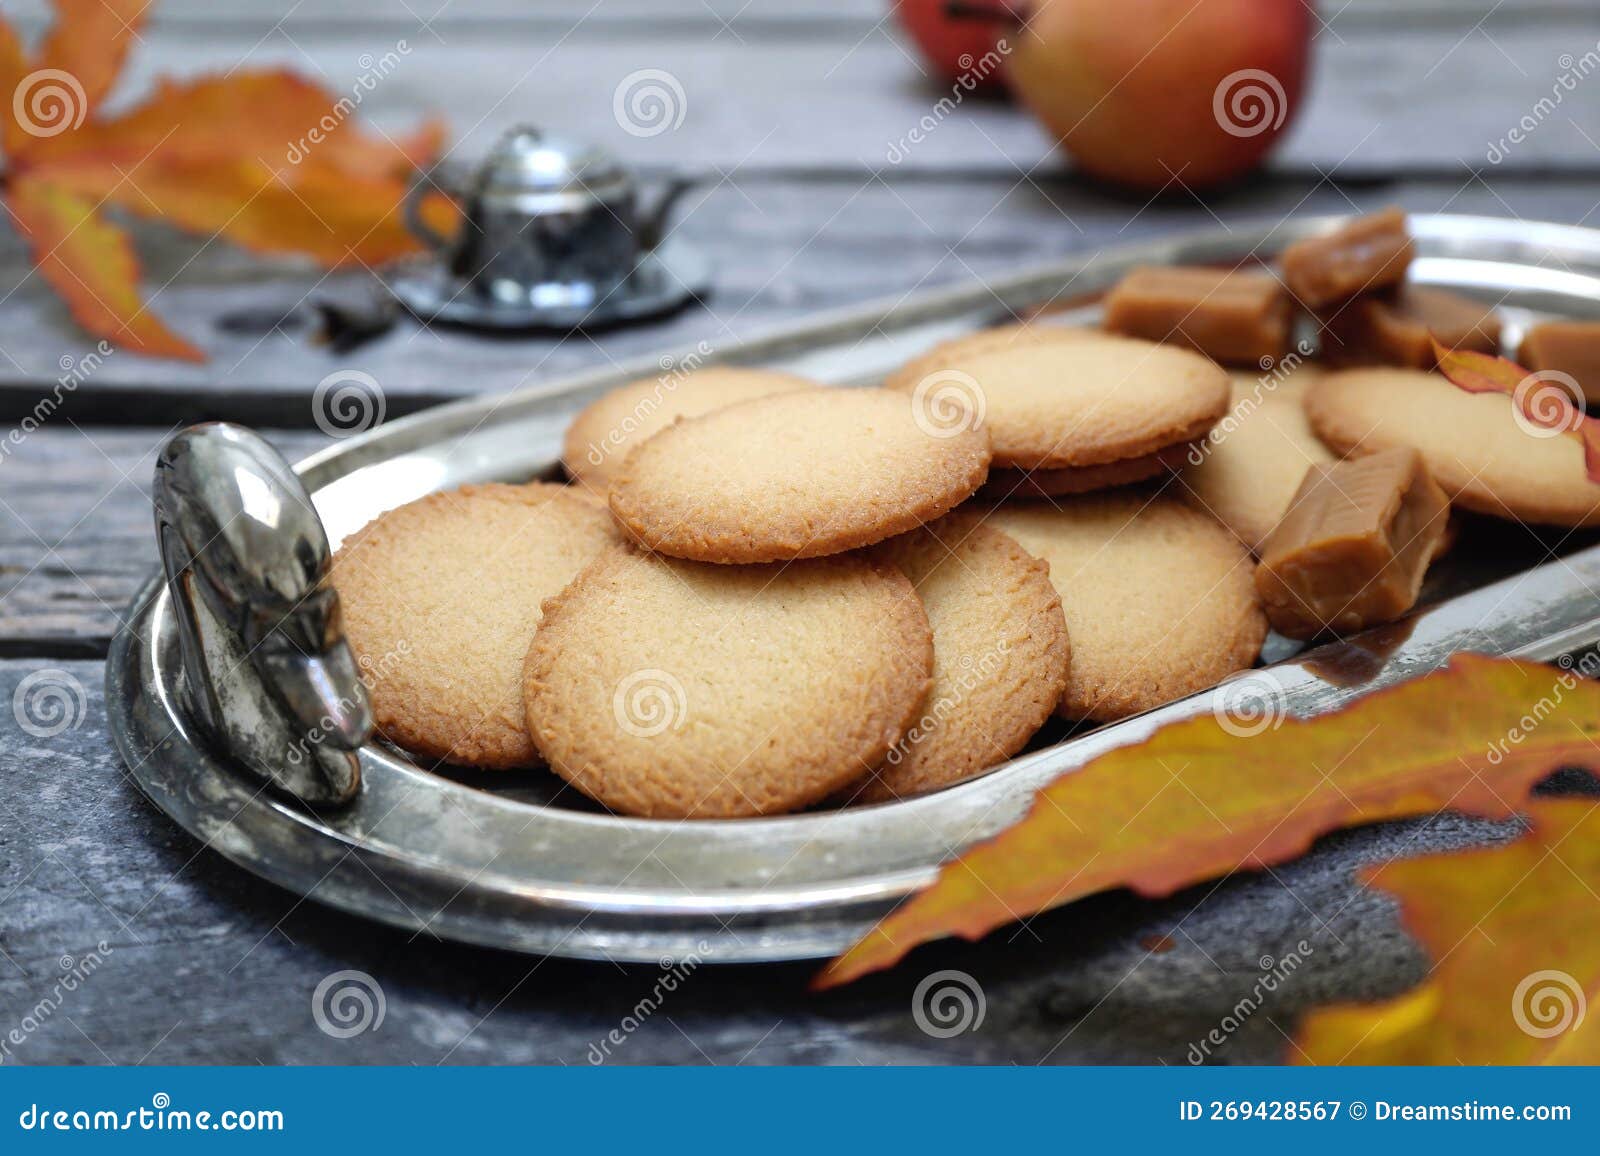 palets bretons, french cookies. salted caramel shortbread breton cookies and autumn leaves